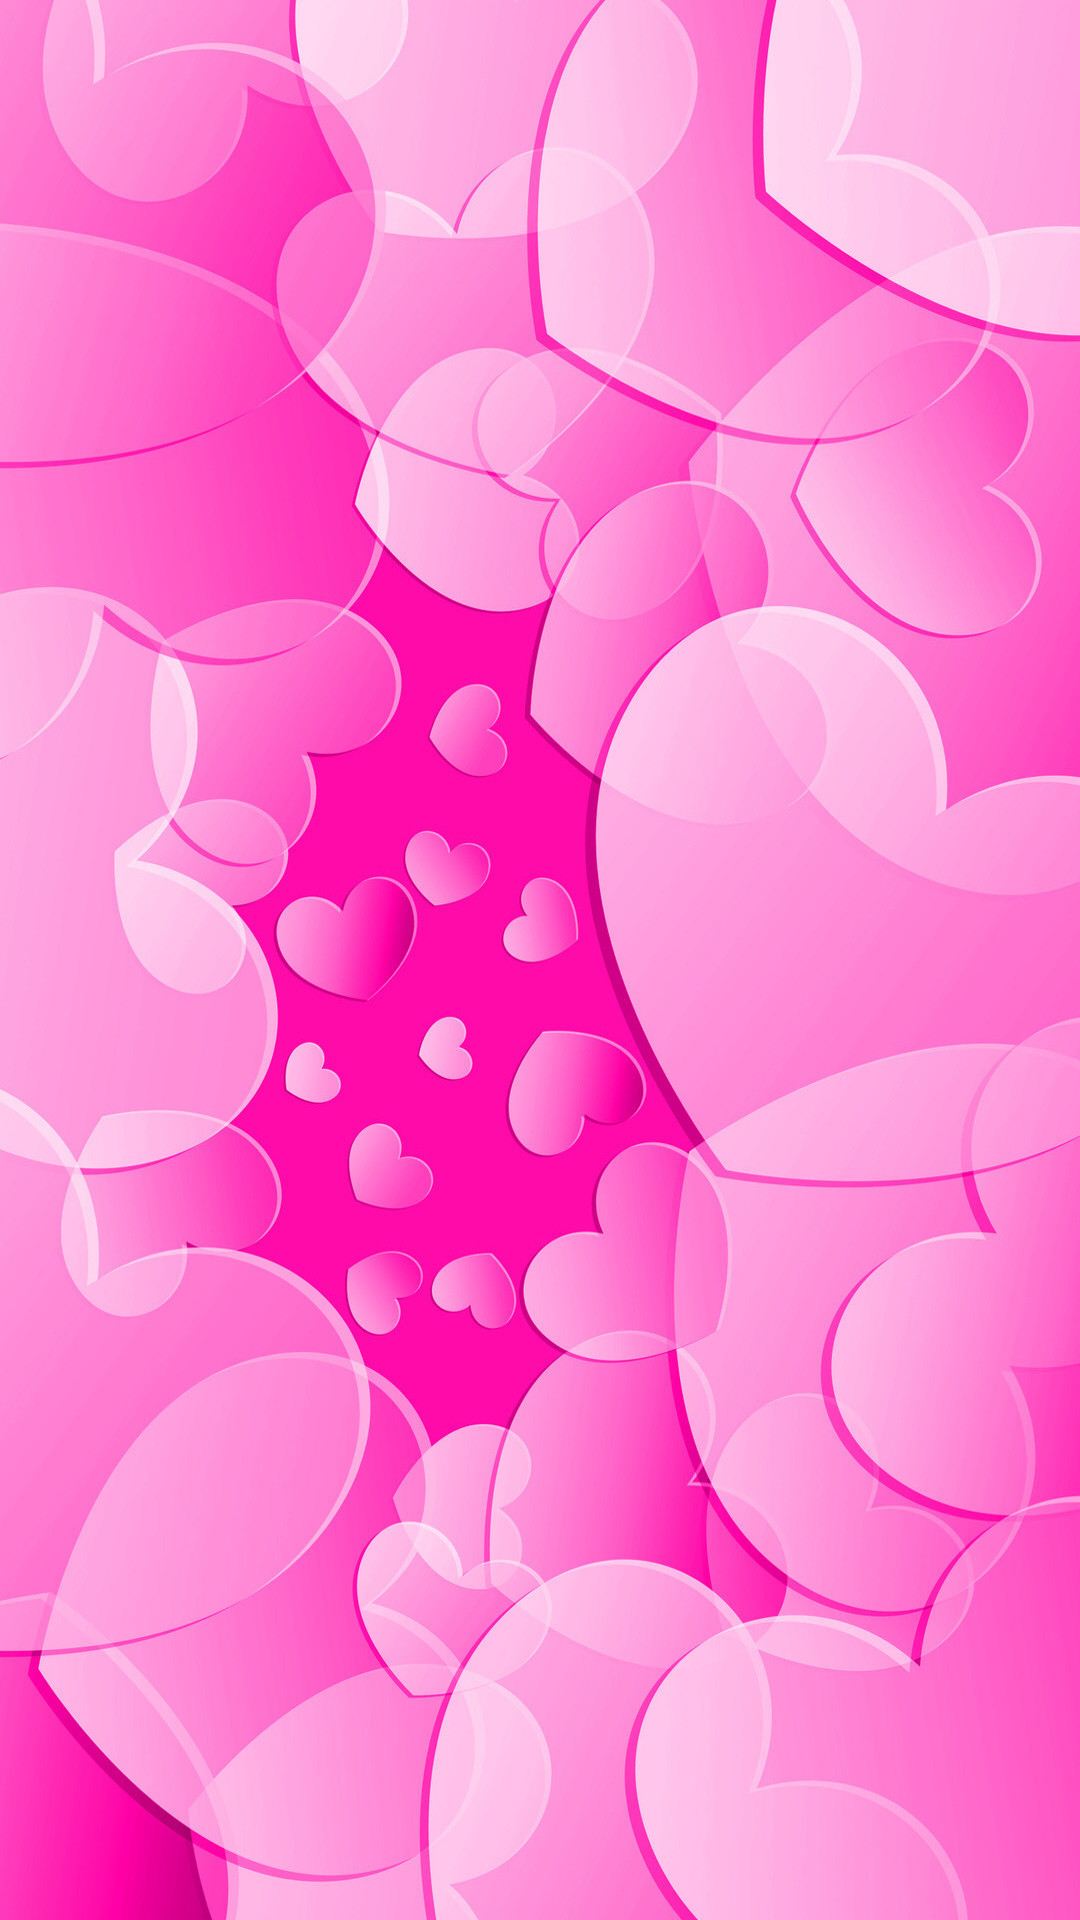 Im really in a Pink mood this week. Im Styling Pink Wallpapers for both Home and Lock Screens today. They are both full of hearts, is love in the air